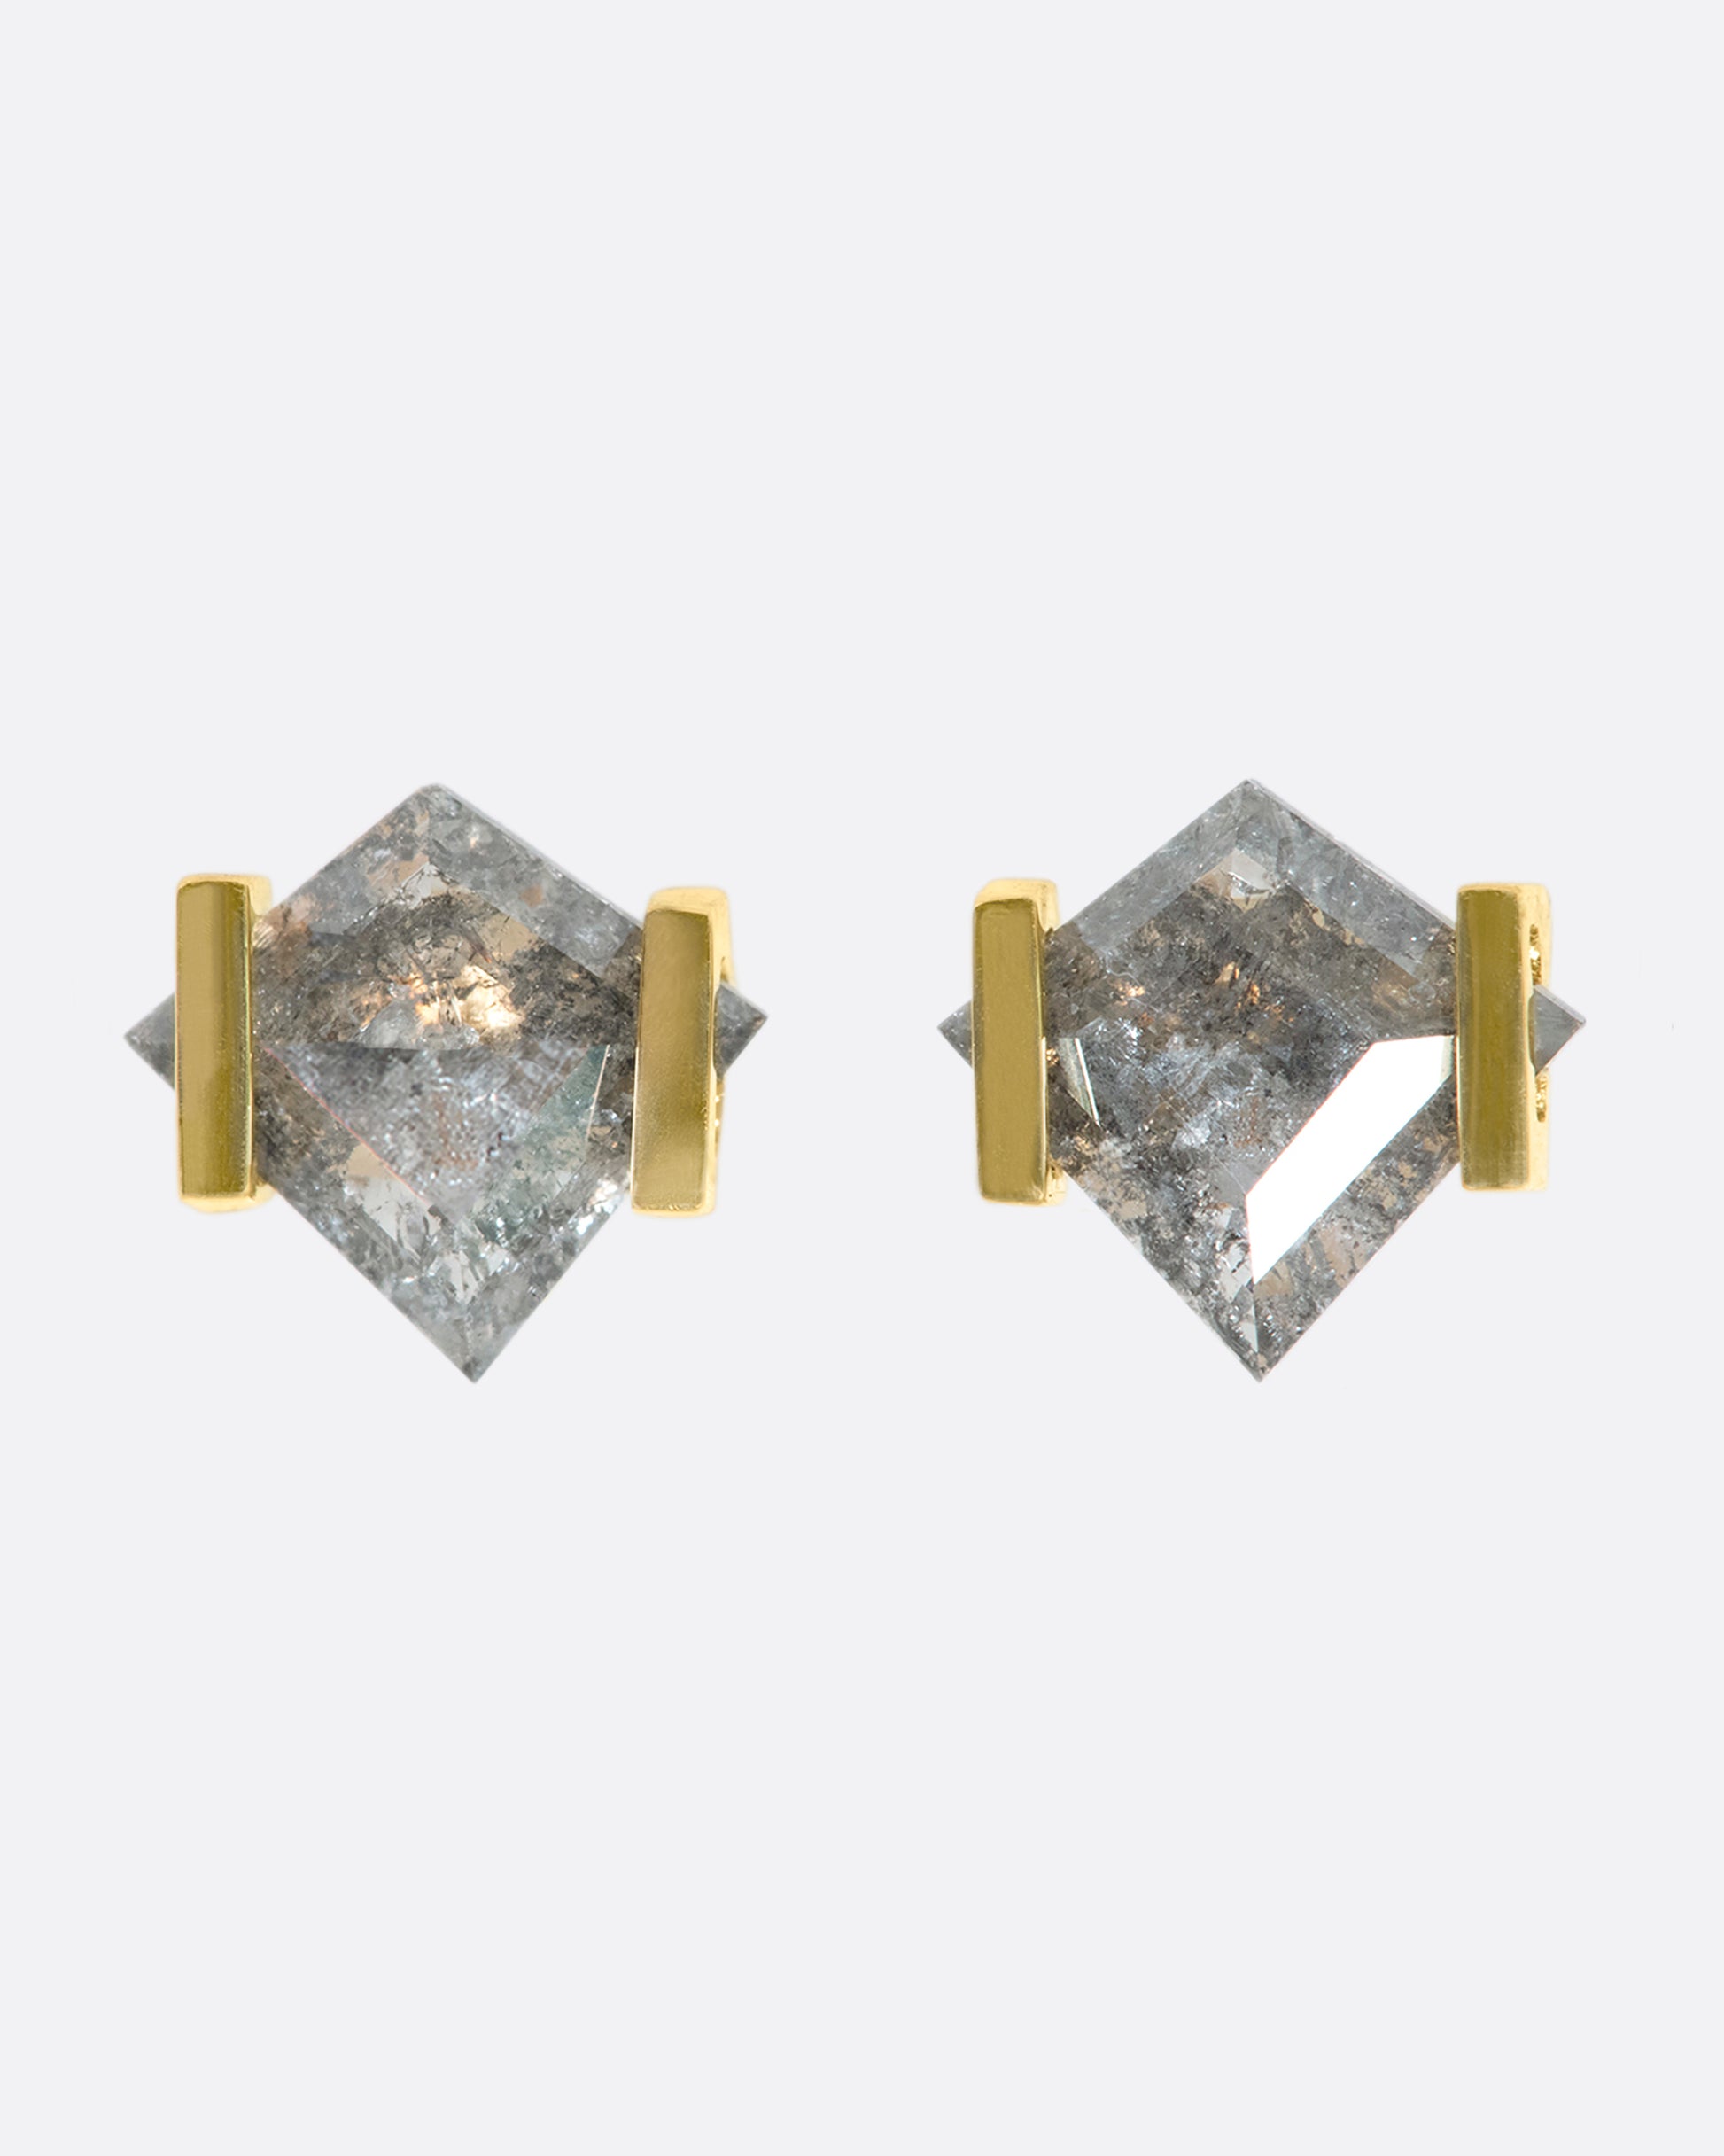 A close up of a pair of kite shaped grey diamonds in delicate gold settings.